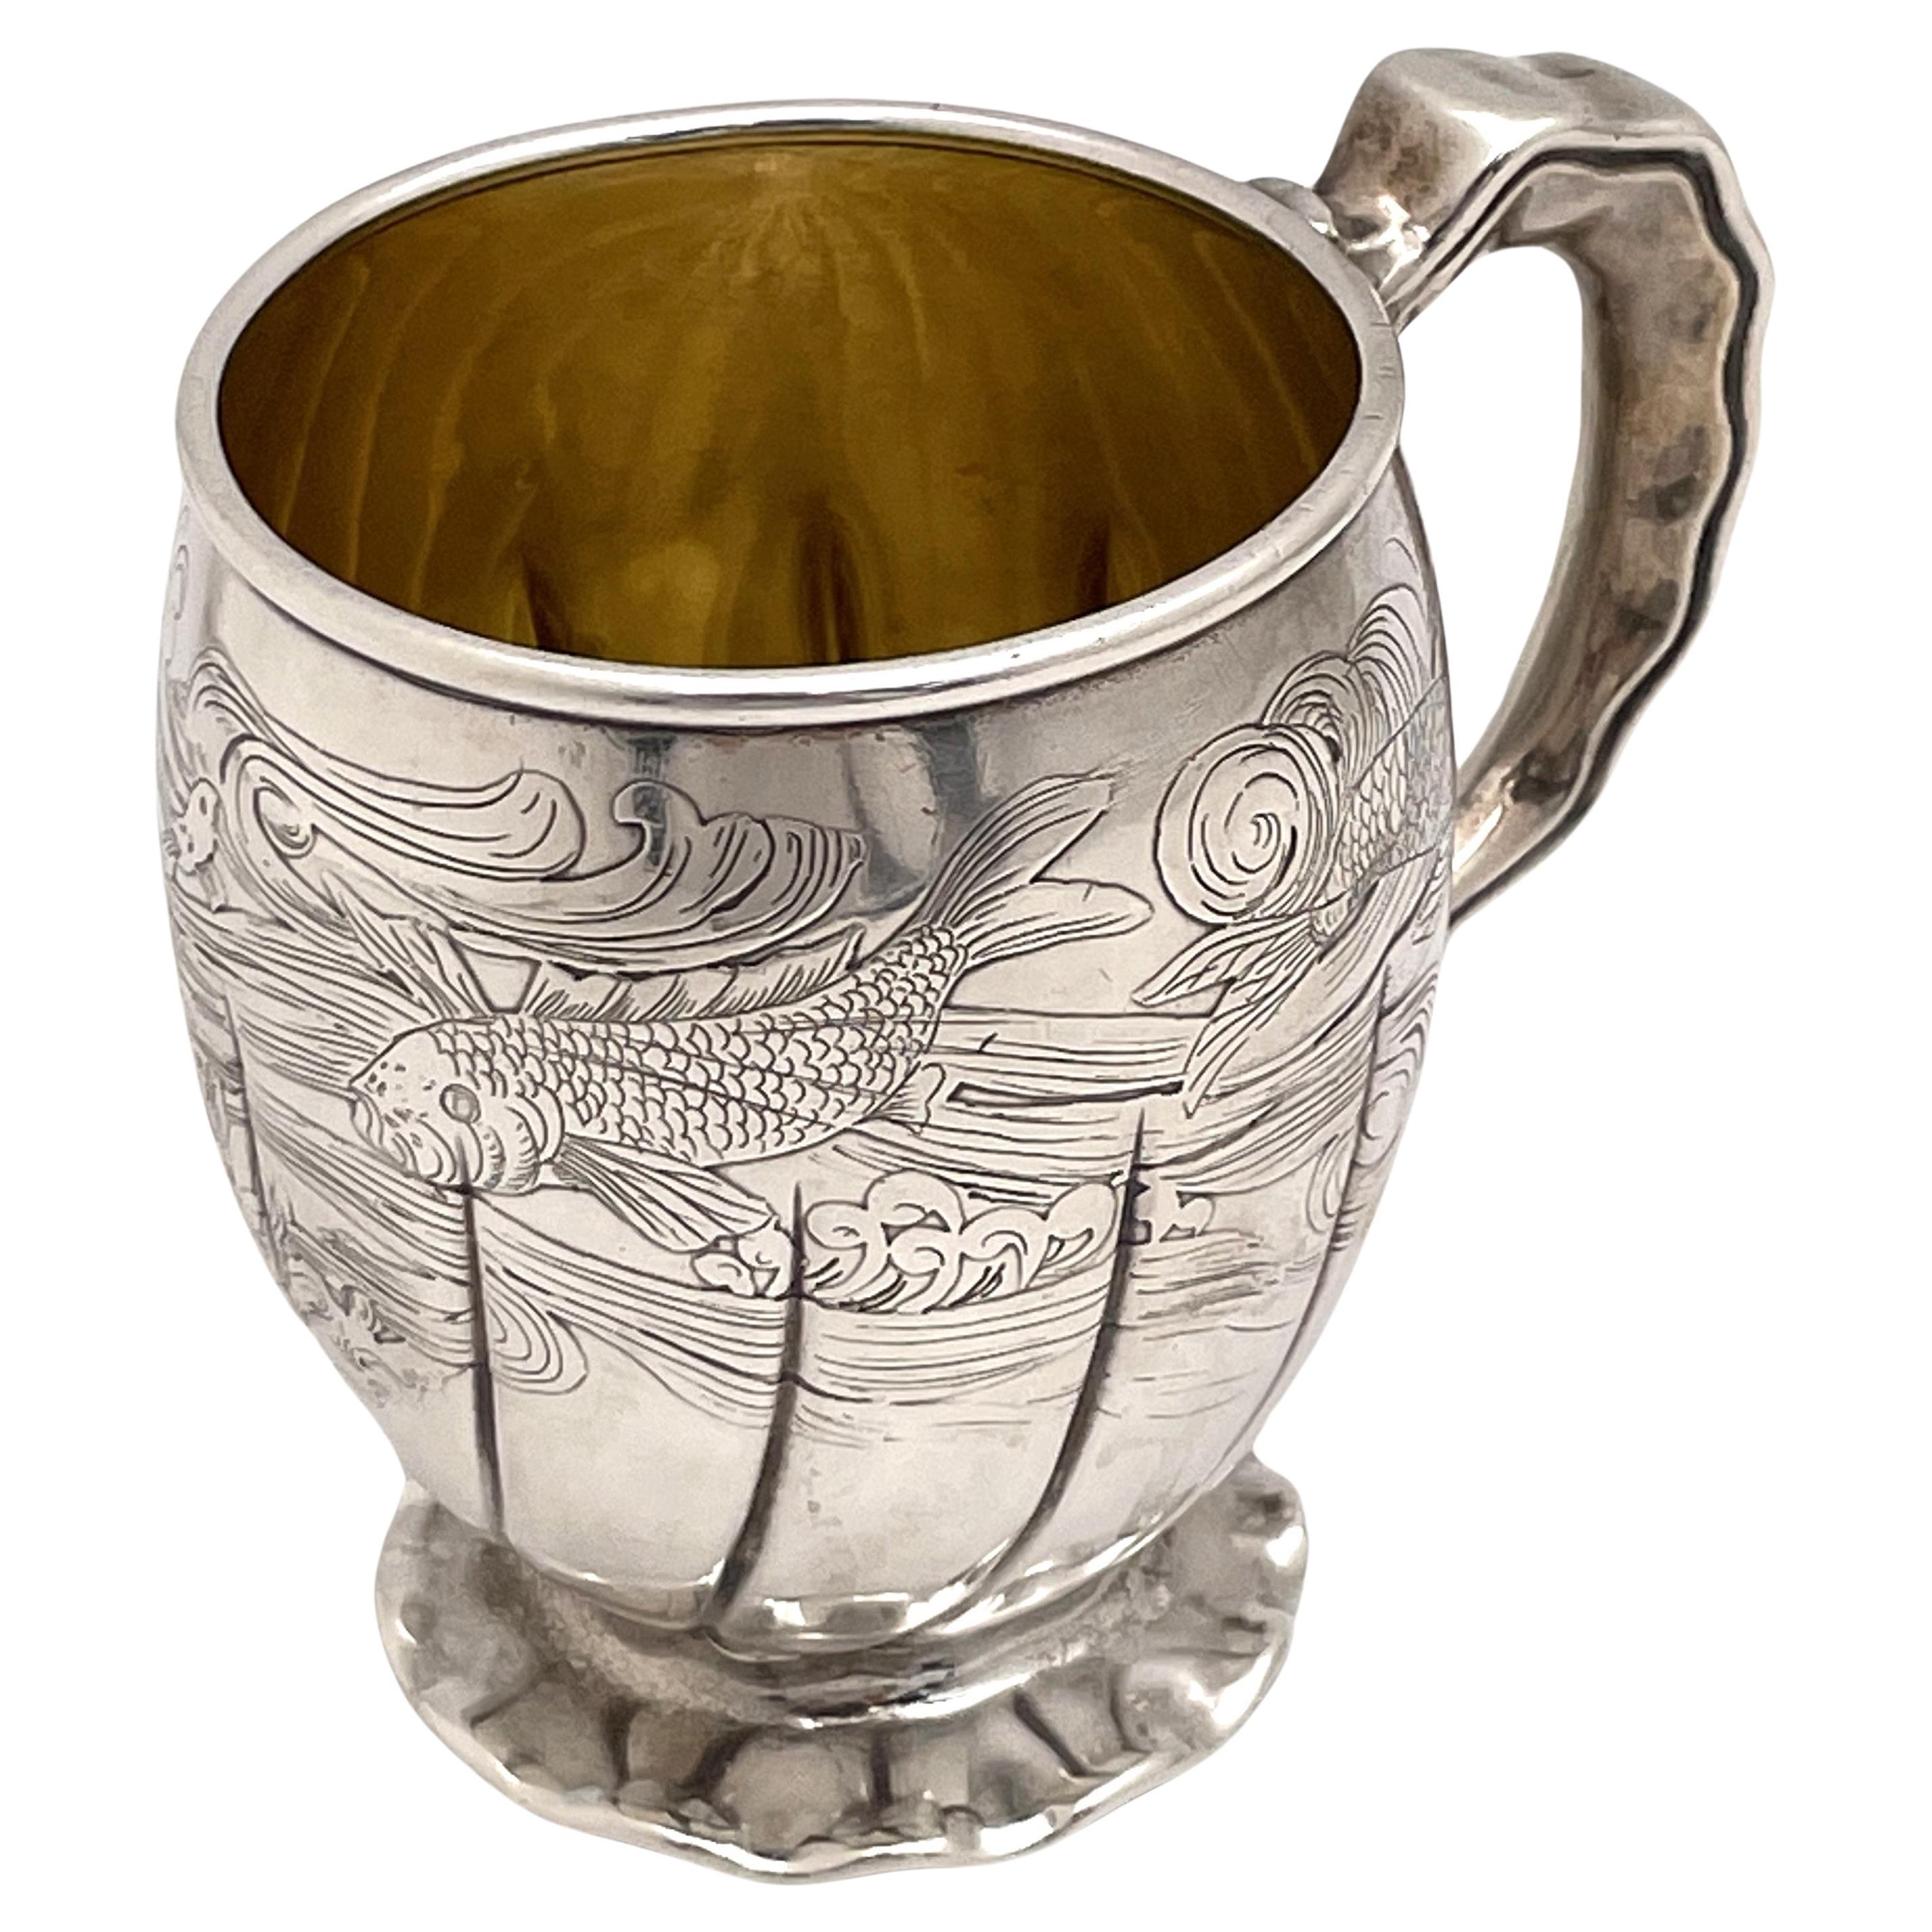 Gorham 1880 Sterling Silver Etched Child's Christening Mug with Aquatic Motifs For Sale